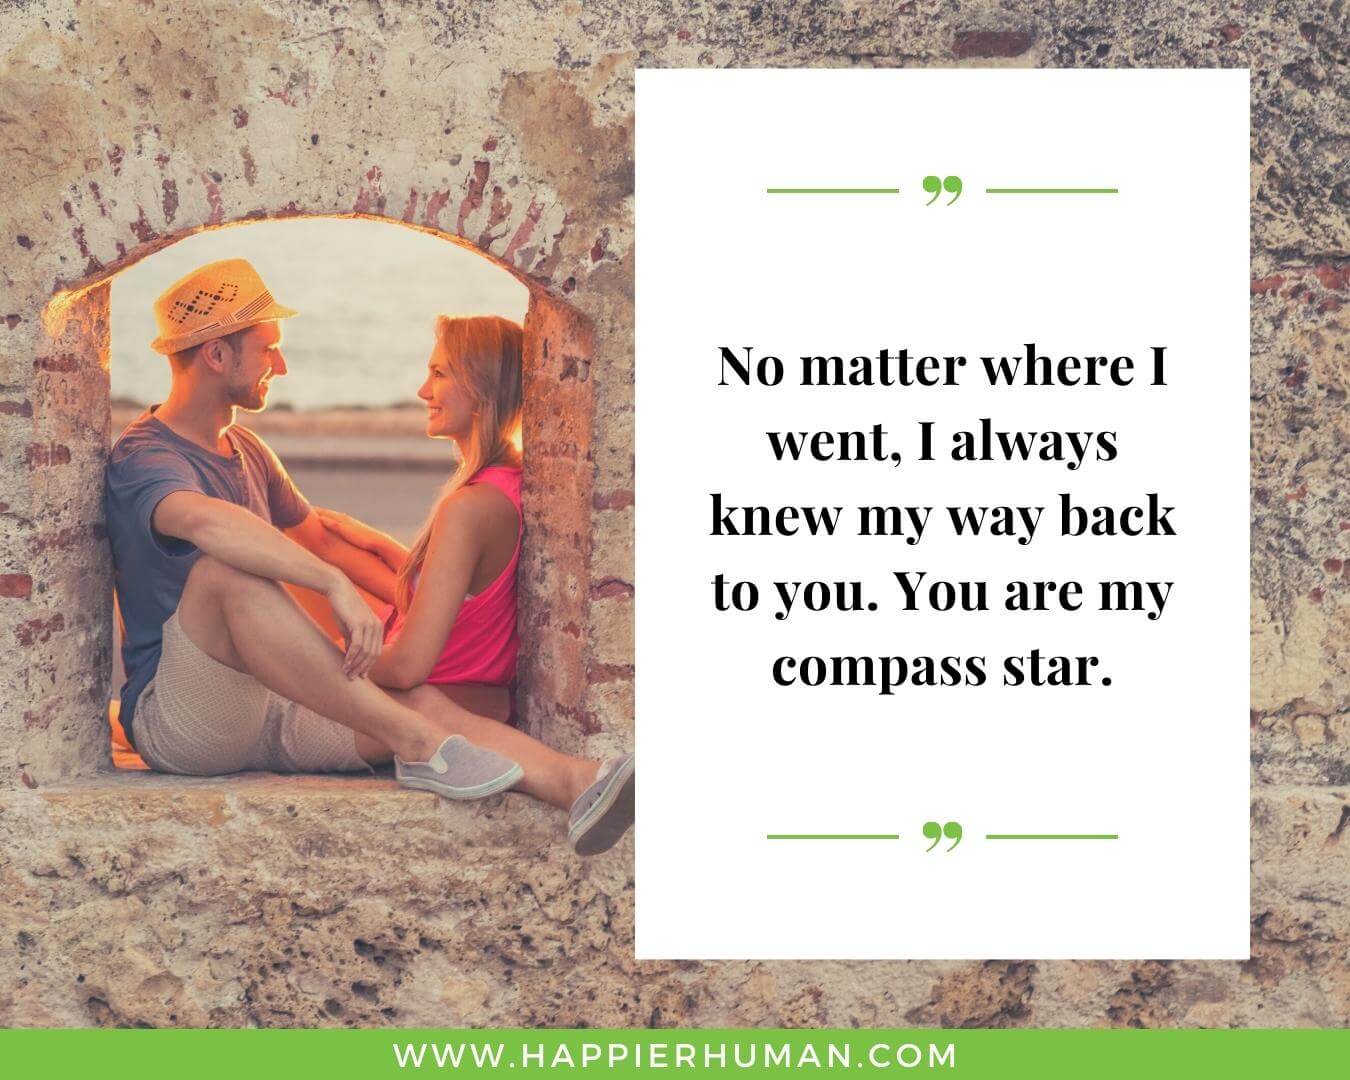 Unconditional Love Quotes for Her - “No matter where I went, I always knew my way back to you. You are my compass star.”